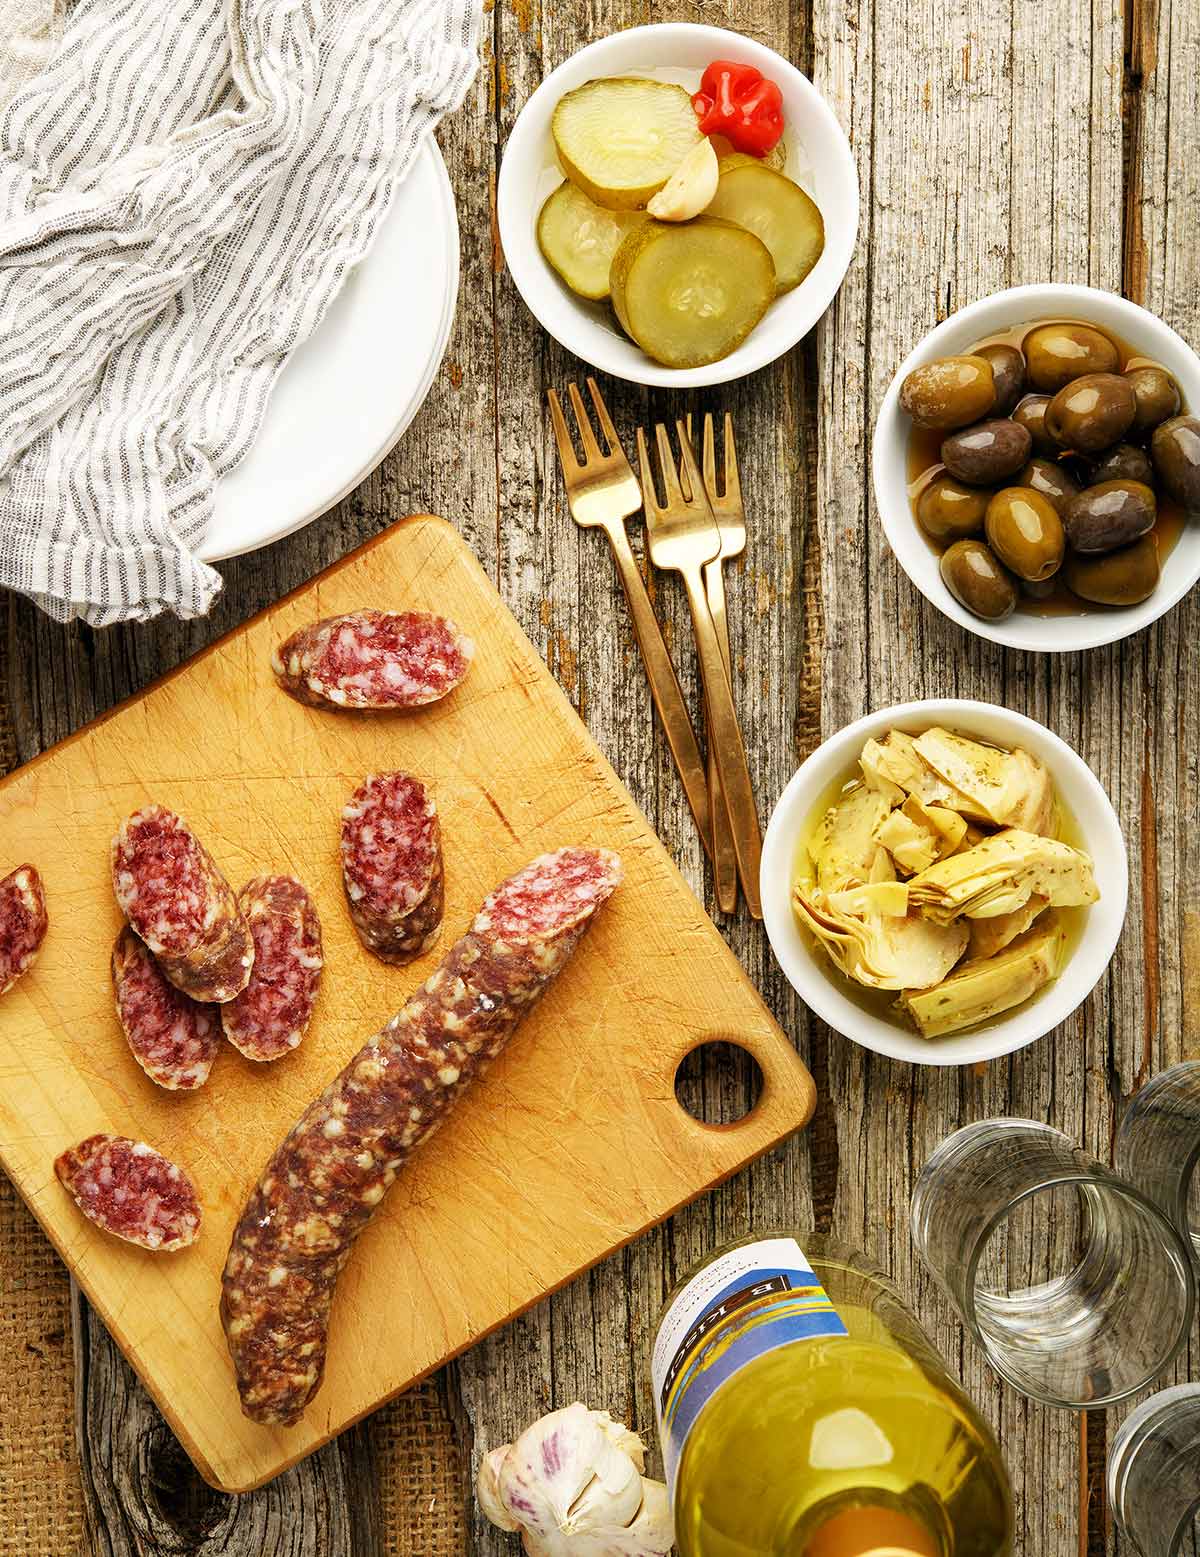 Spanish fuet sausage sliced on a cutting board with pickles alongside. 